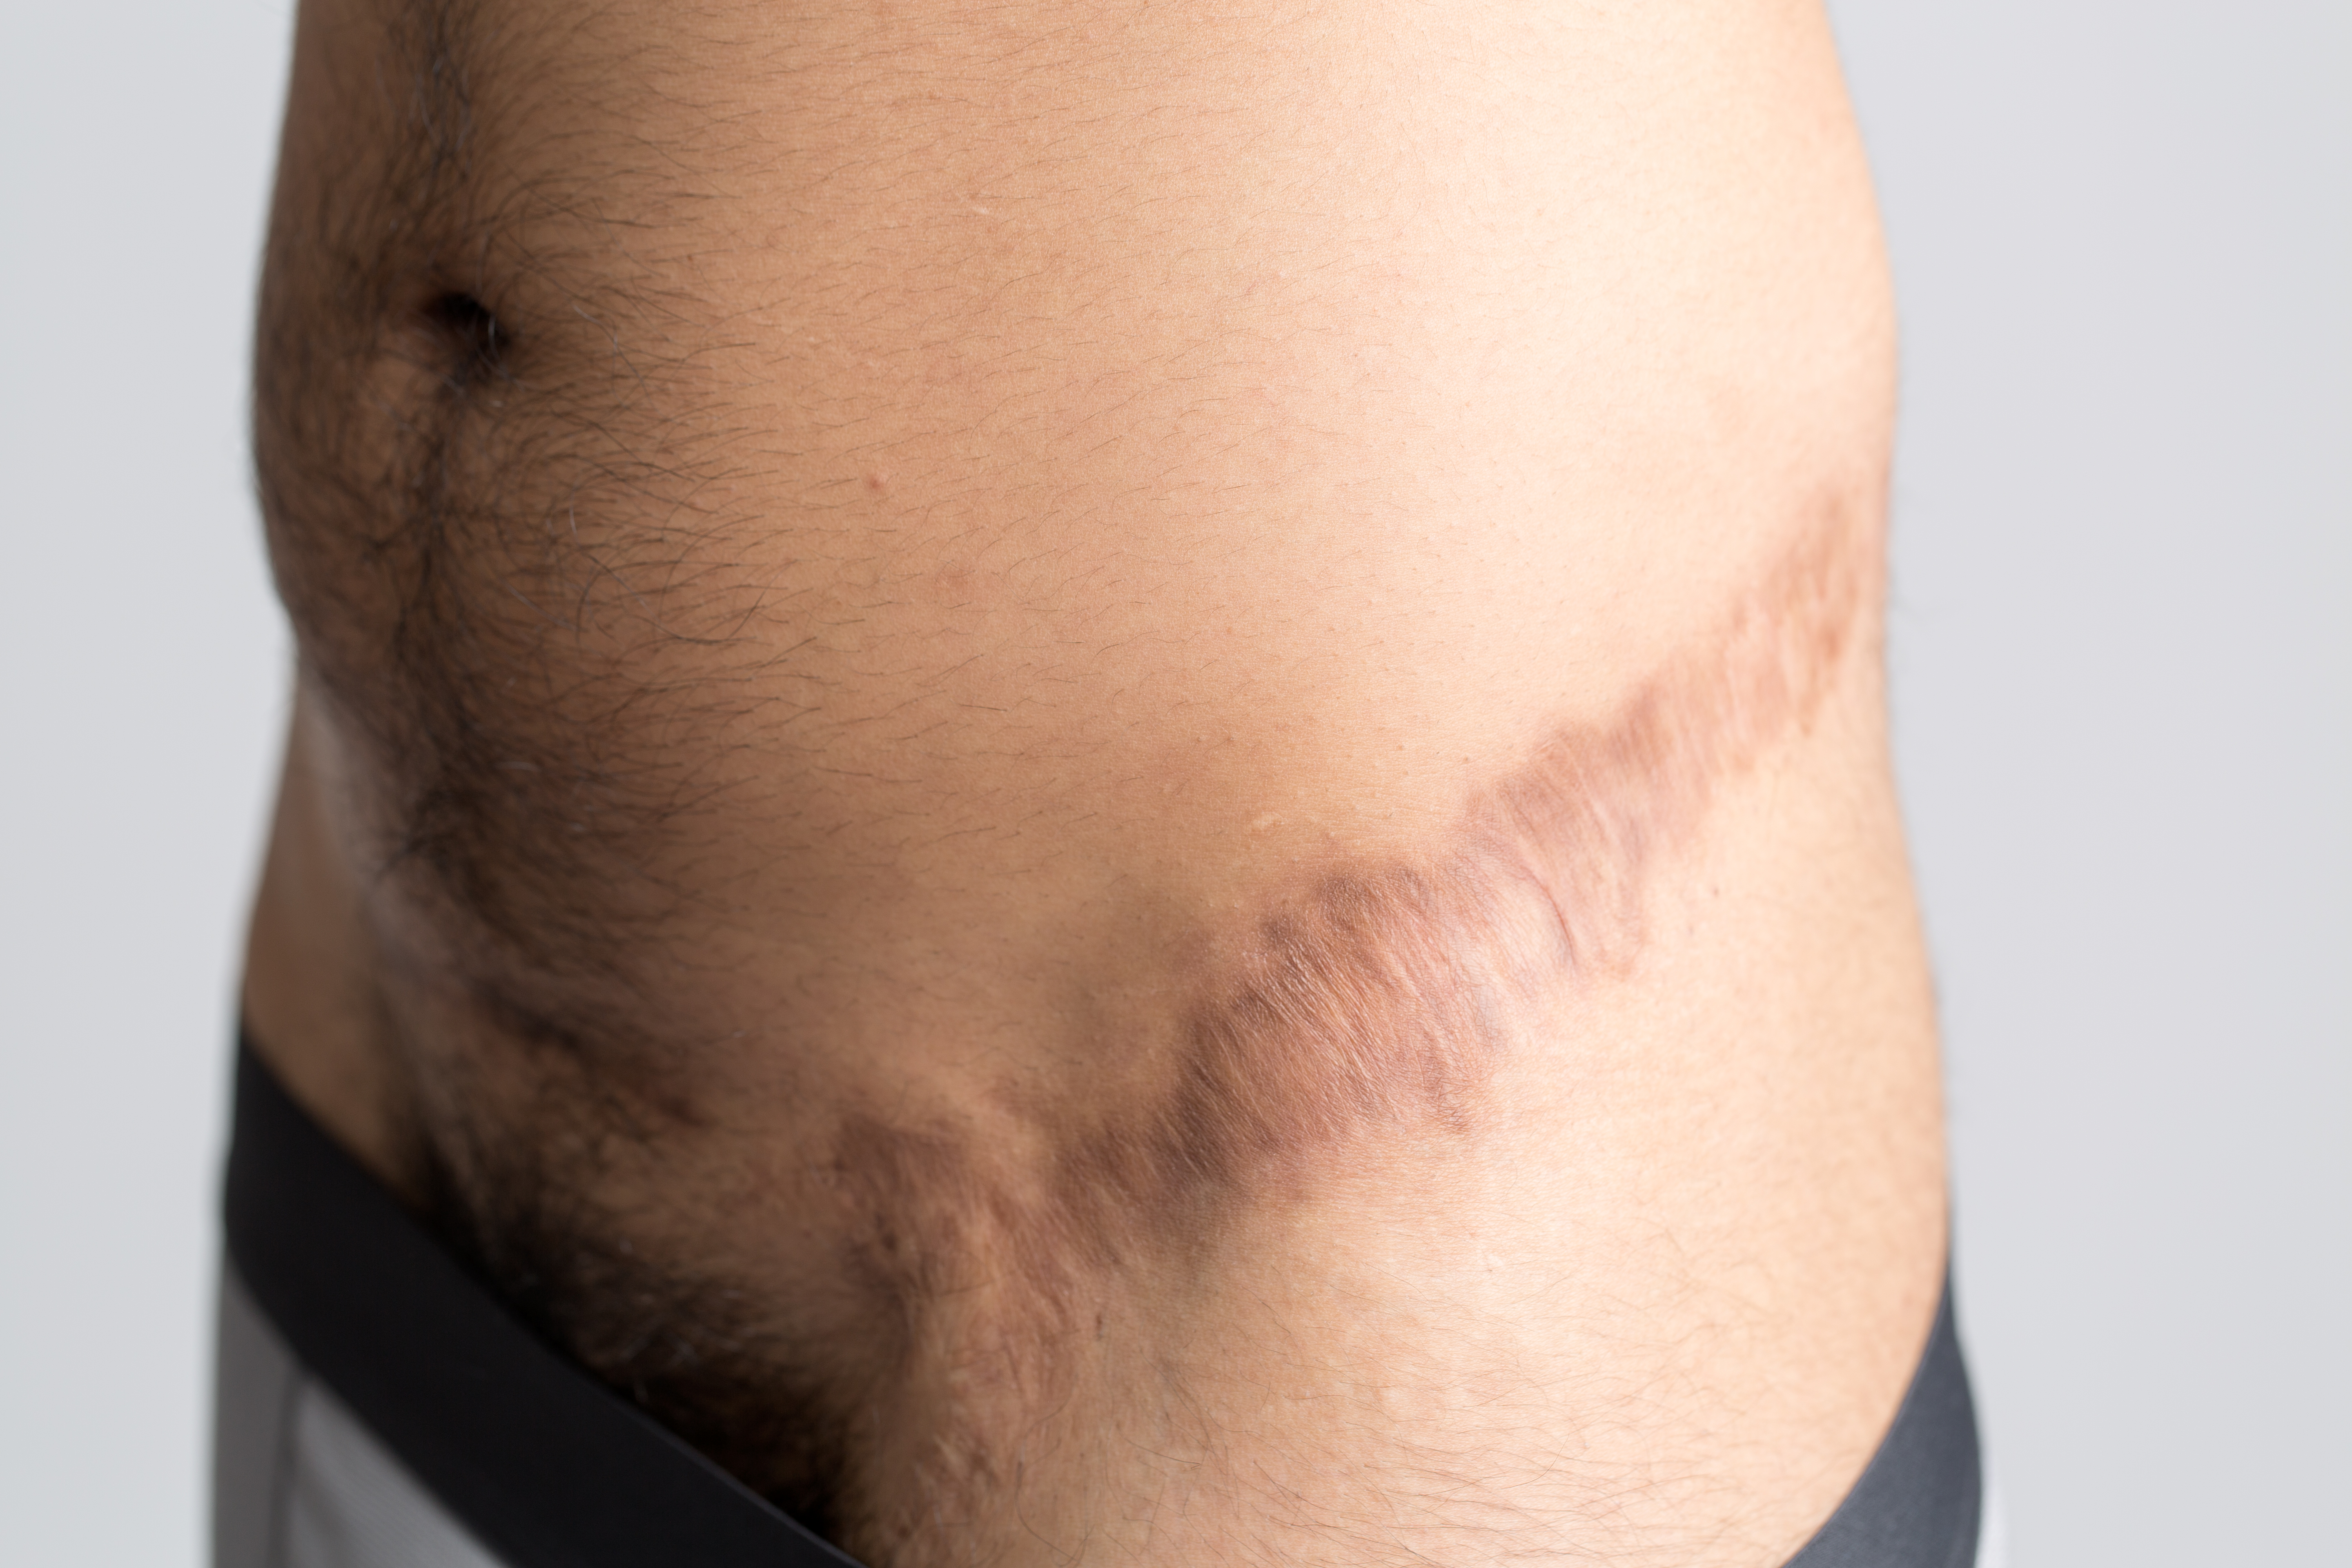 Sex reassignment scar on hip.jpg English: Alexander, 30 years old Wikimedia Sverige Date 6 July 2016, 14:57:10 Source Private collection institution